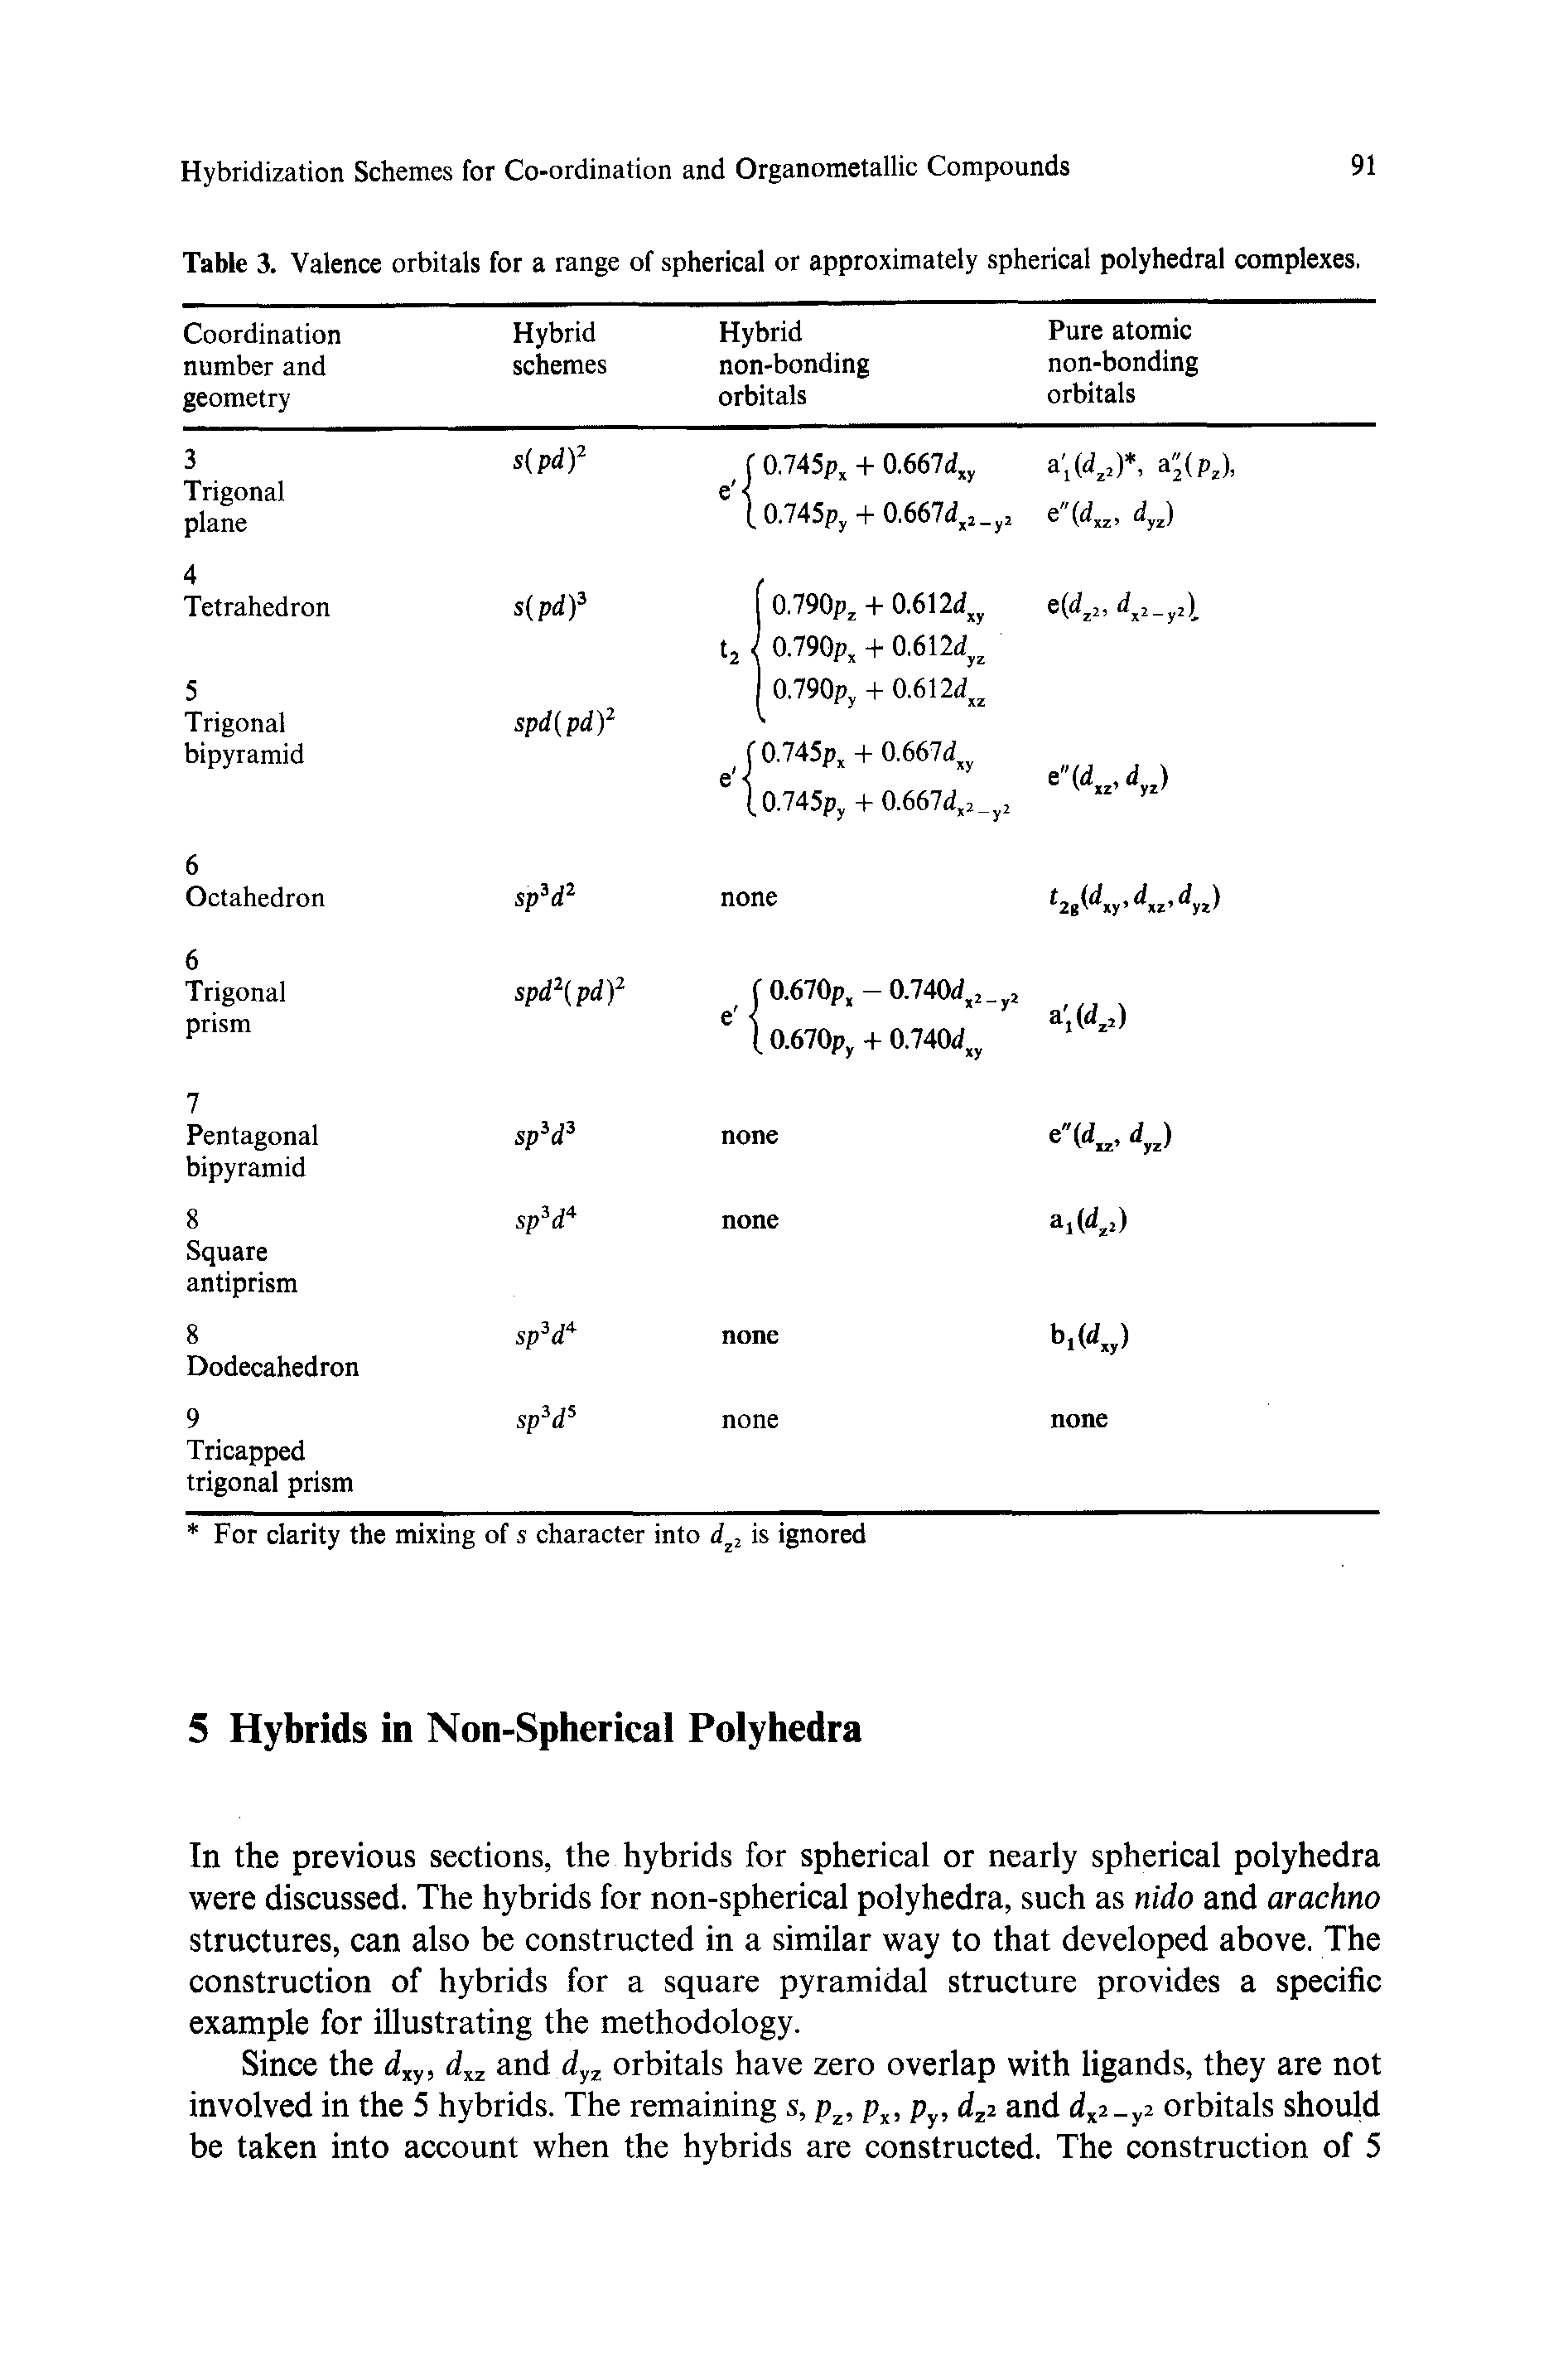 Table 3. Valence orbitals for a range of spherical or approximately spherical polyhedral complexes.